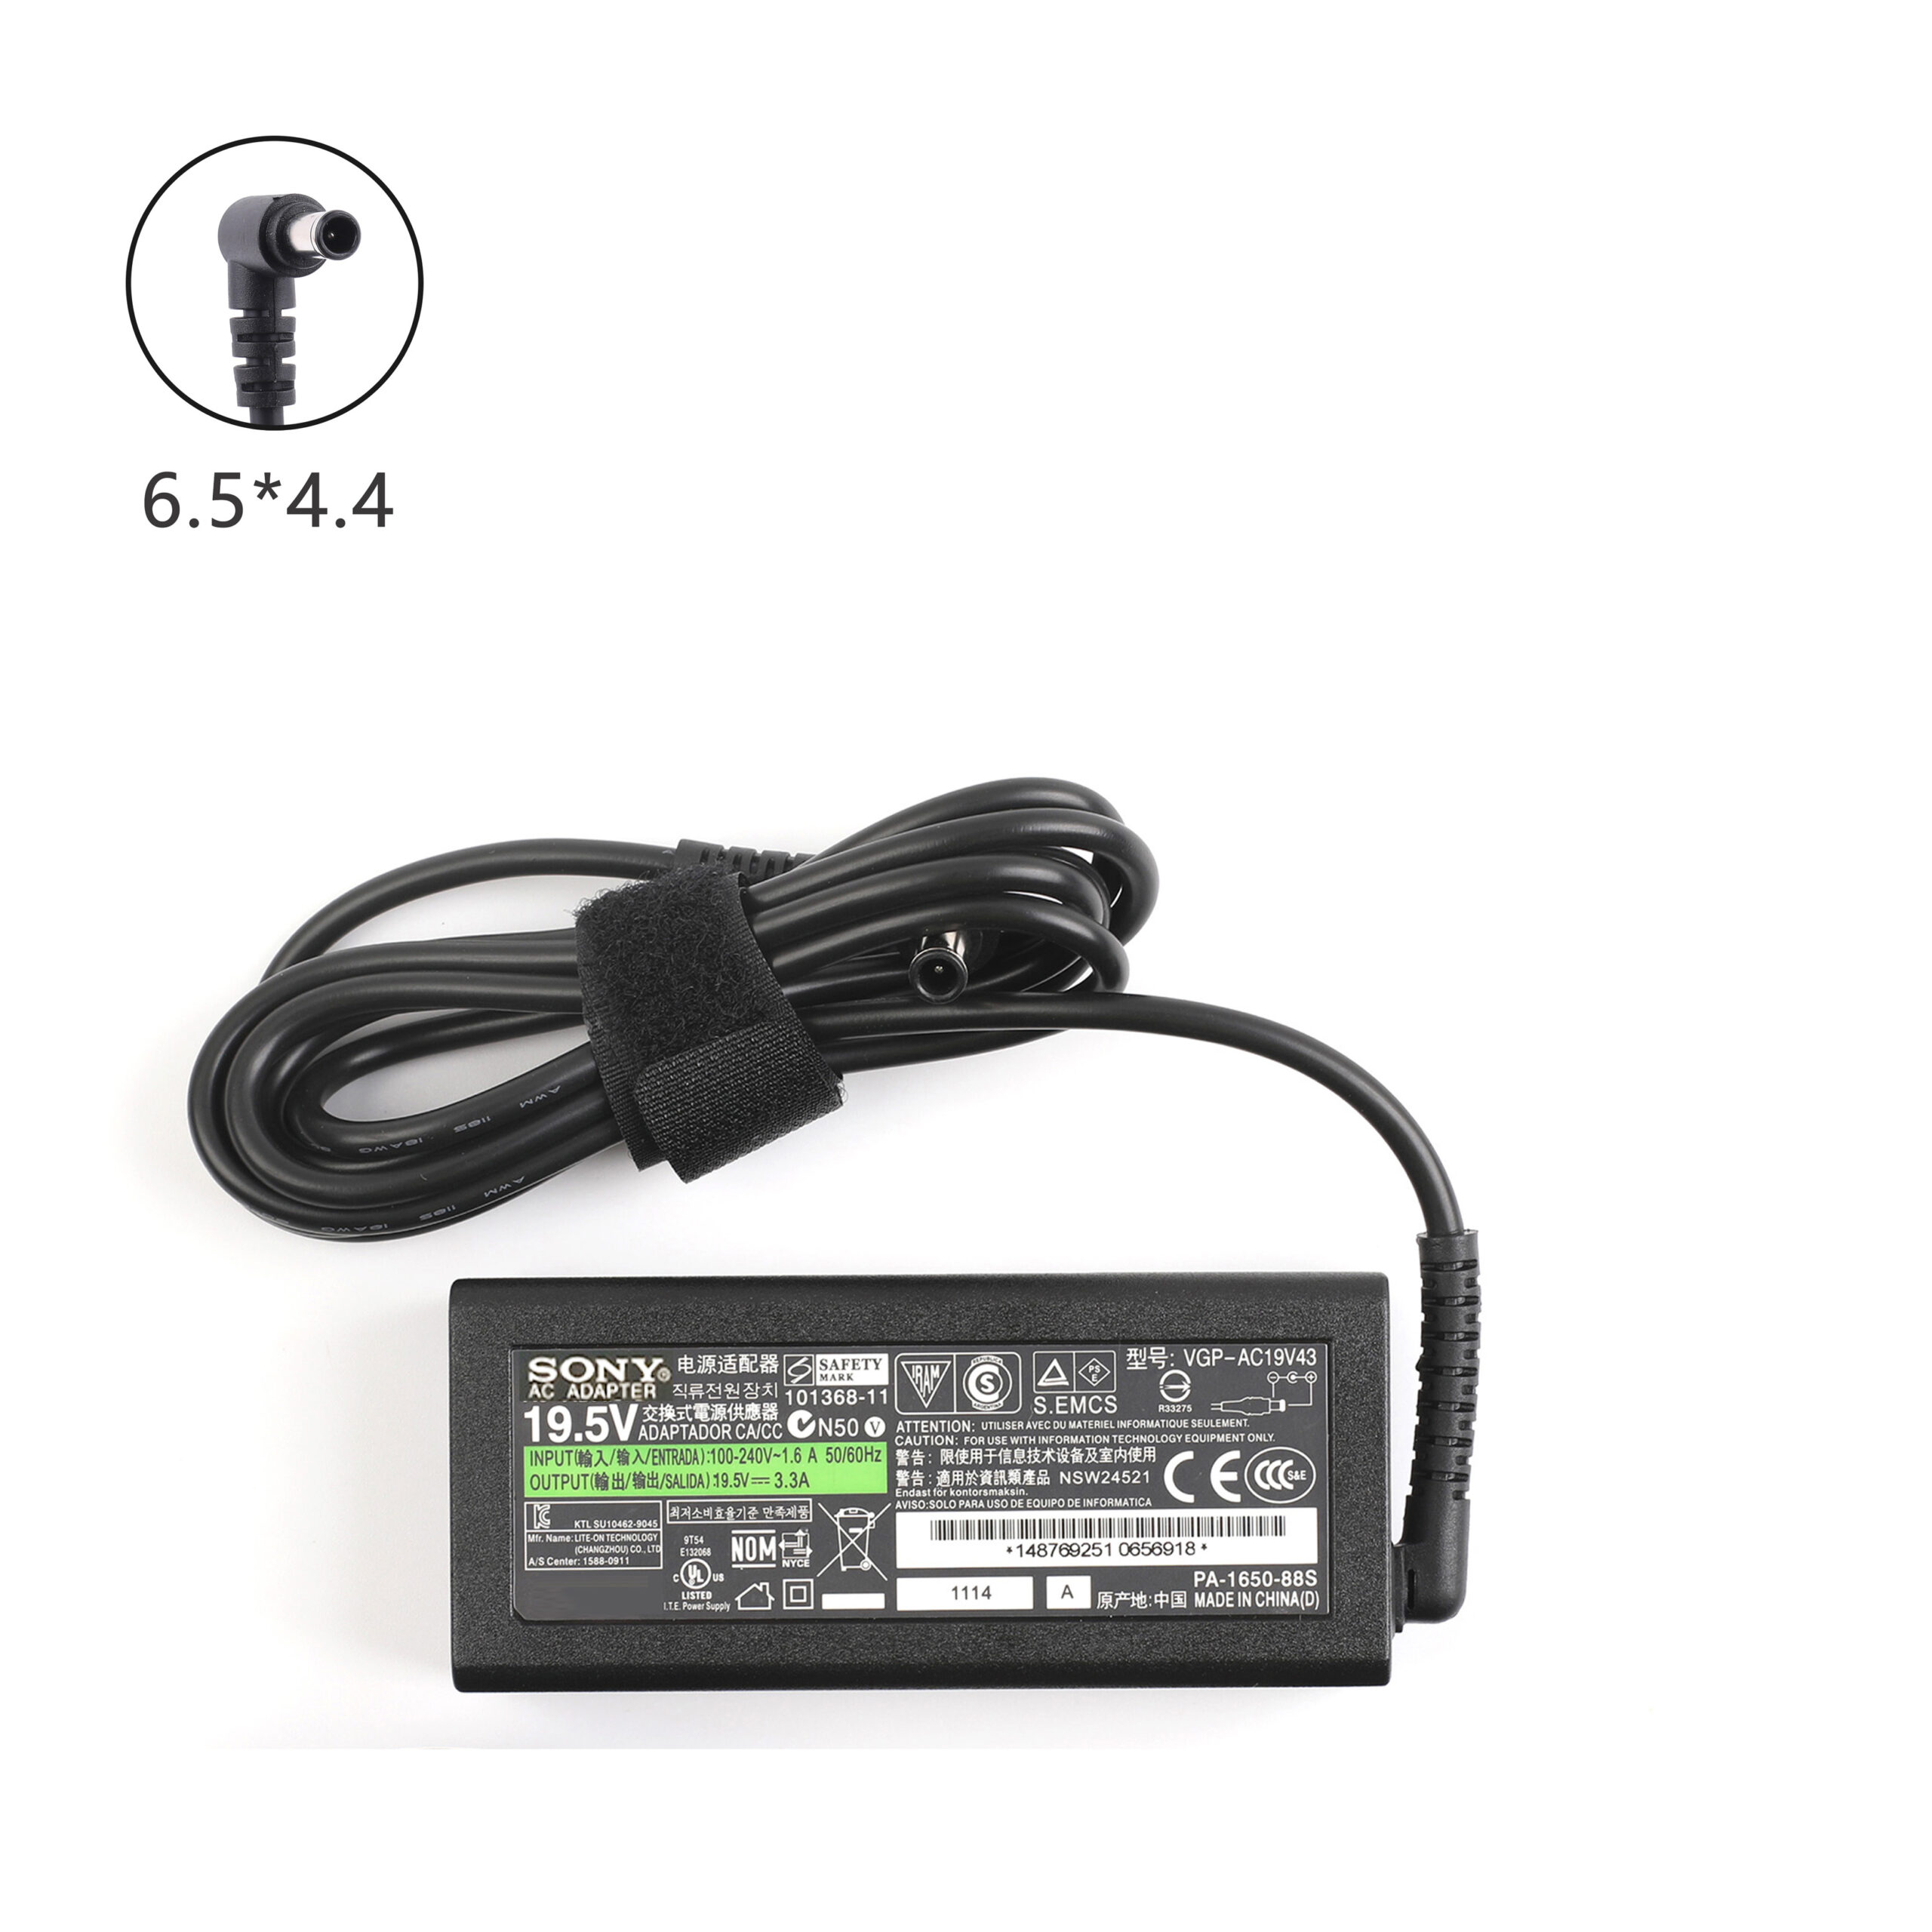 Sony Vaio VPCEB13FX/BI VPCEB16FX/B Sony 65W 19.5V 3.3A 6.5 4.4MM Adaptateur Chargeur Adapter